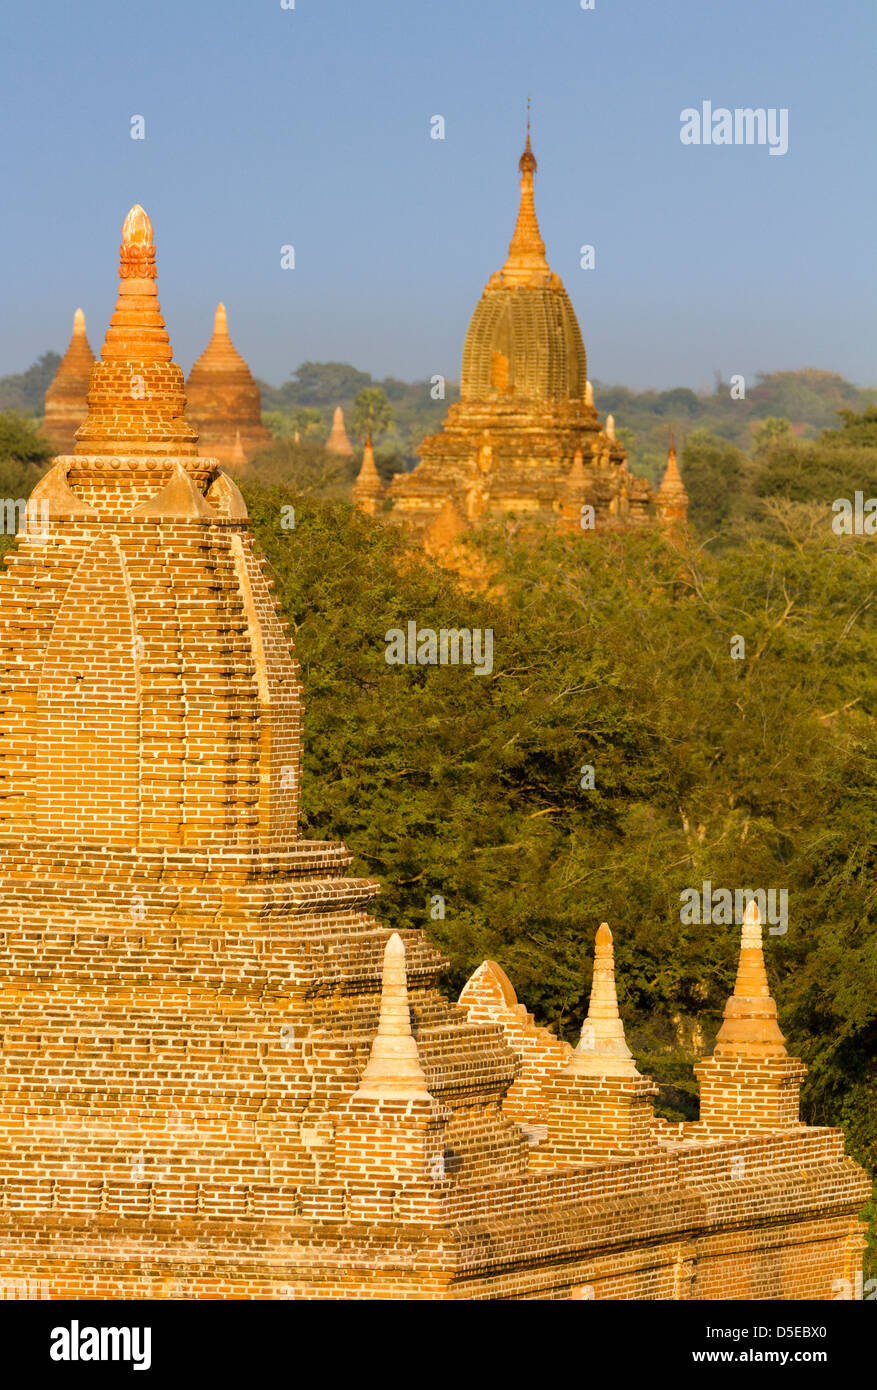 The Temples and Pagodas of Bagan, Myanmar - early morning 15 Stock Photo